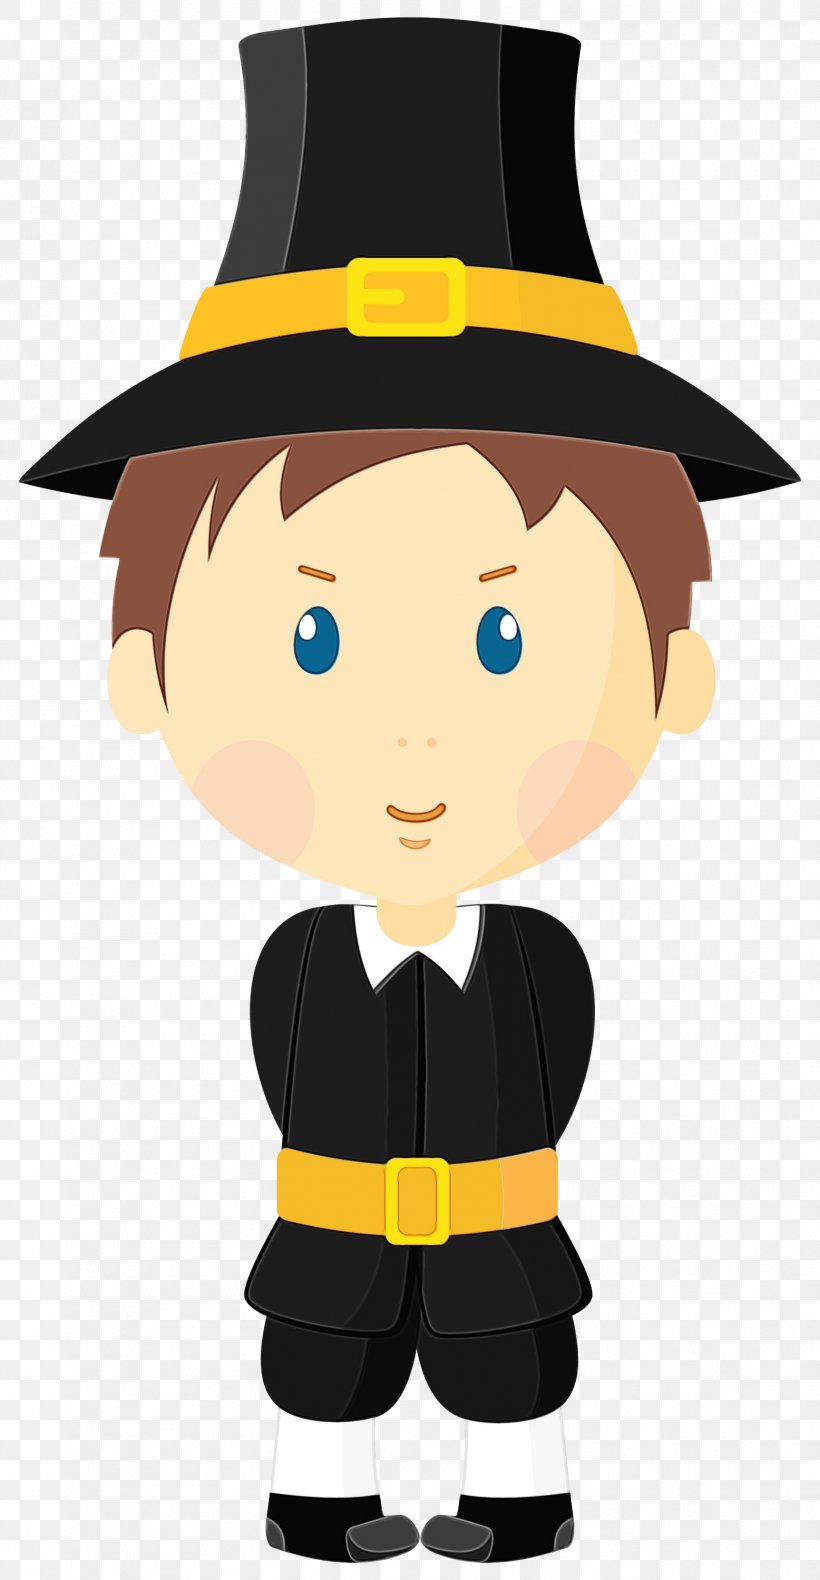 Clip Art Image Vector Graphics Illustration, PNG, 1556x3000px, Pilgrims, Animation, Art, Cartoon, Fictional Character Download Free